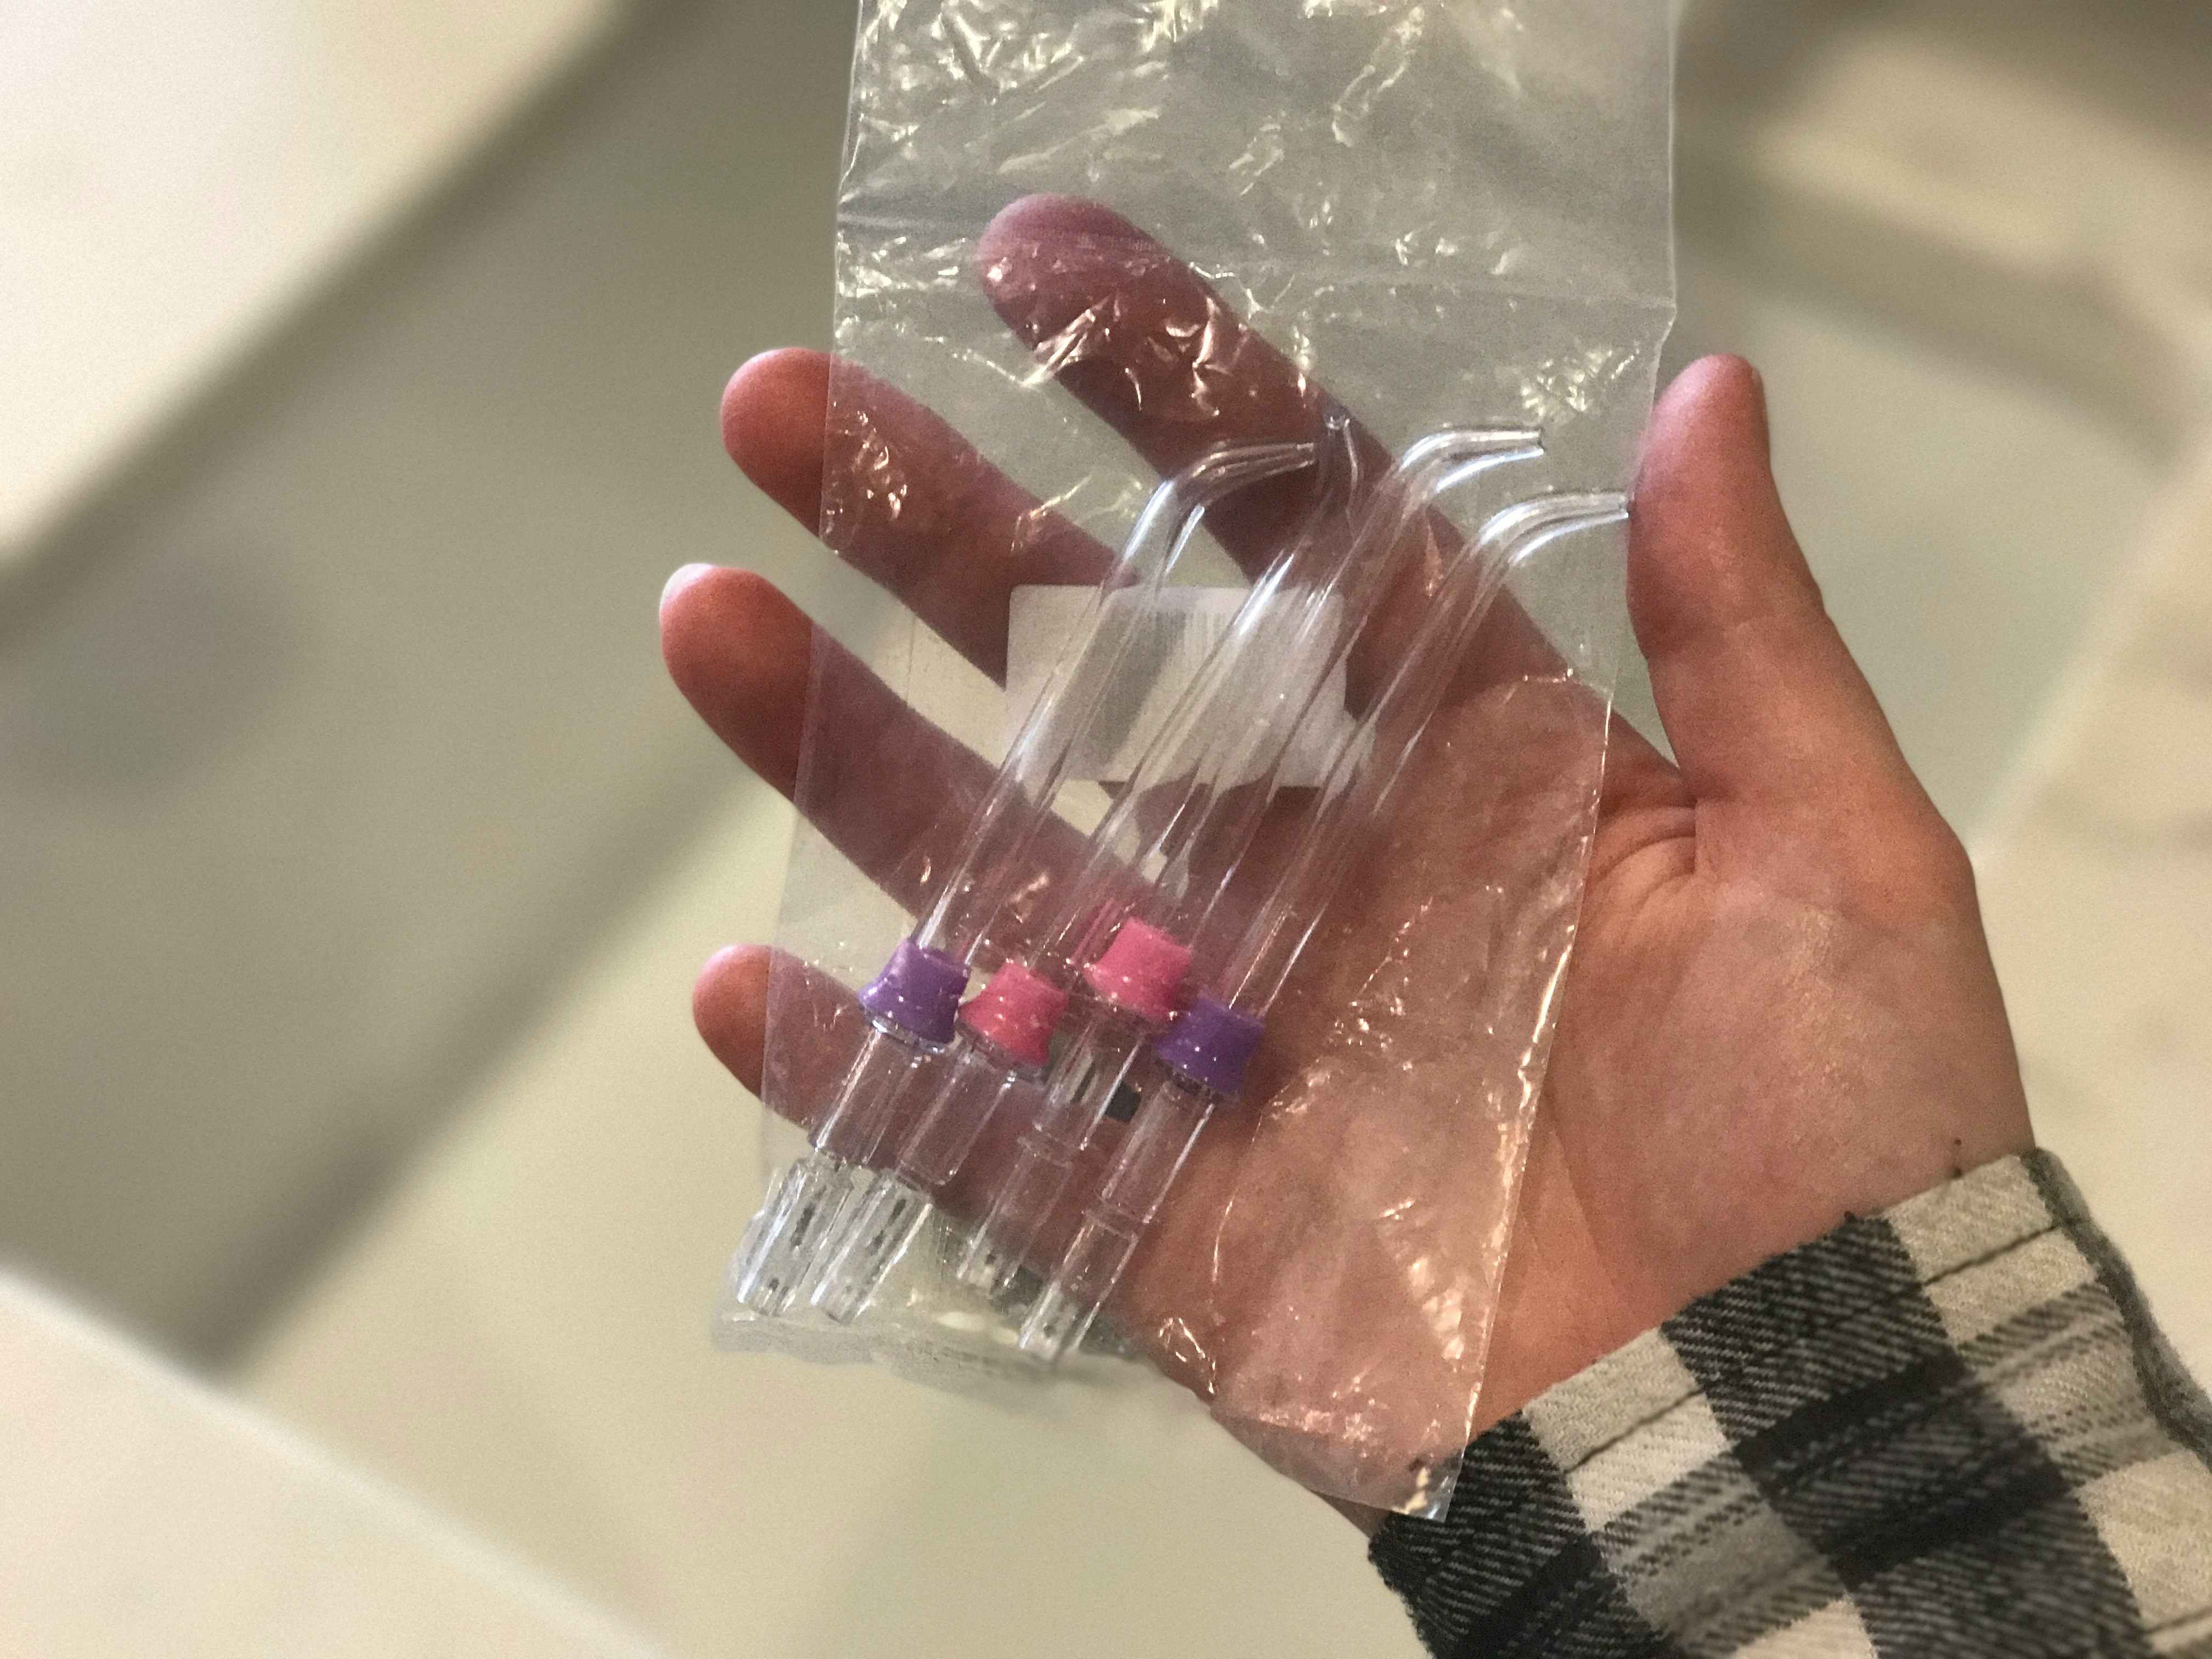 A person holding a package of Waterpik oral flossers.